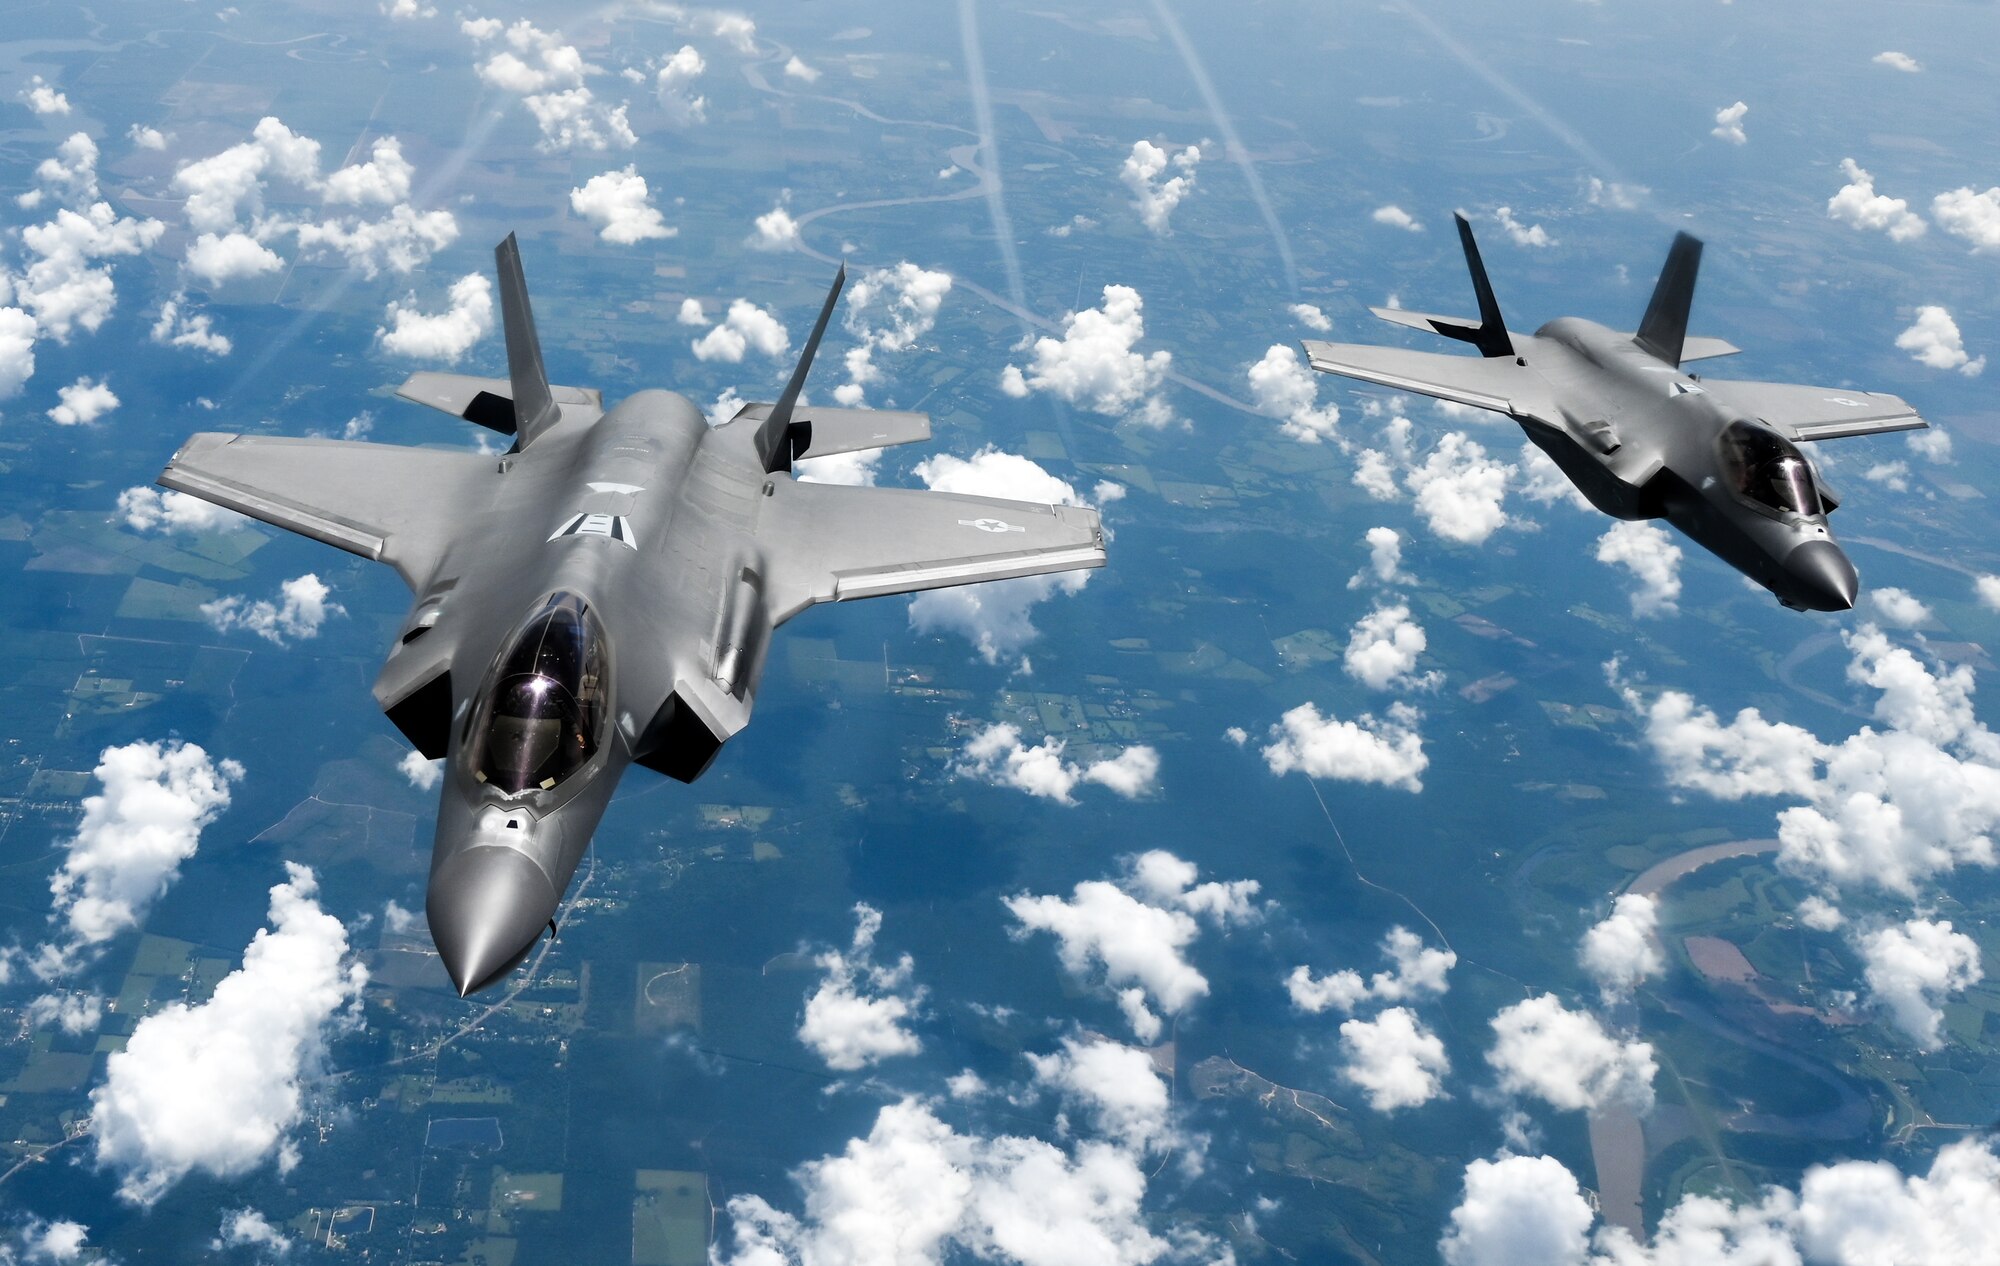 The F-35 Lightning II Demonstration Team assigned to 388th Fighter Wing at Hill Air Force Base, Utah, heads back to home station after receiving aerial refueling from a KC-135 Stratotanker assigned to the 465th Air Refueling Squadron at Tinker Air Force Base, Oklahoma, May 31, 2023.  Aerial refueling allows aircraft across the DoD inventory to travel greater distances without having to land to refuel.